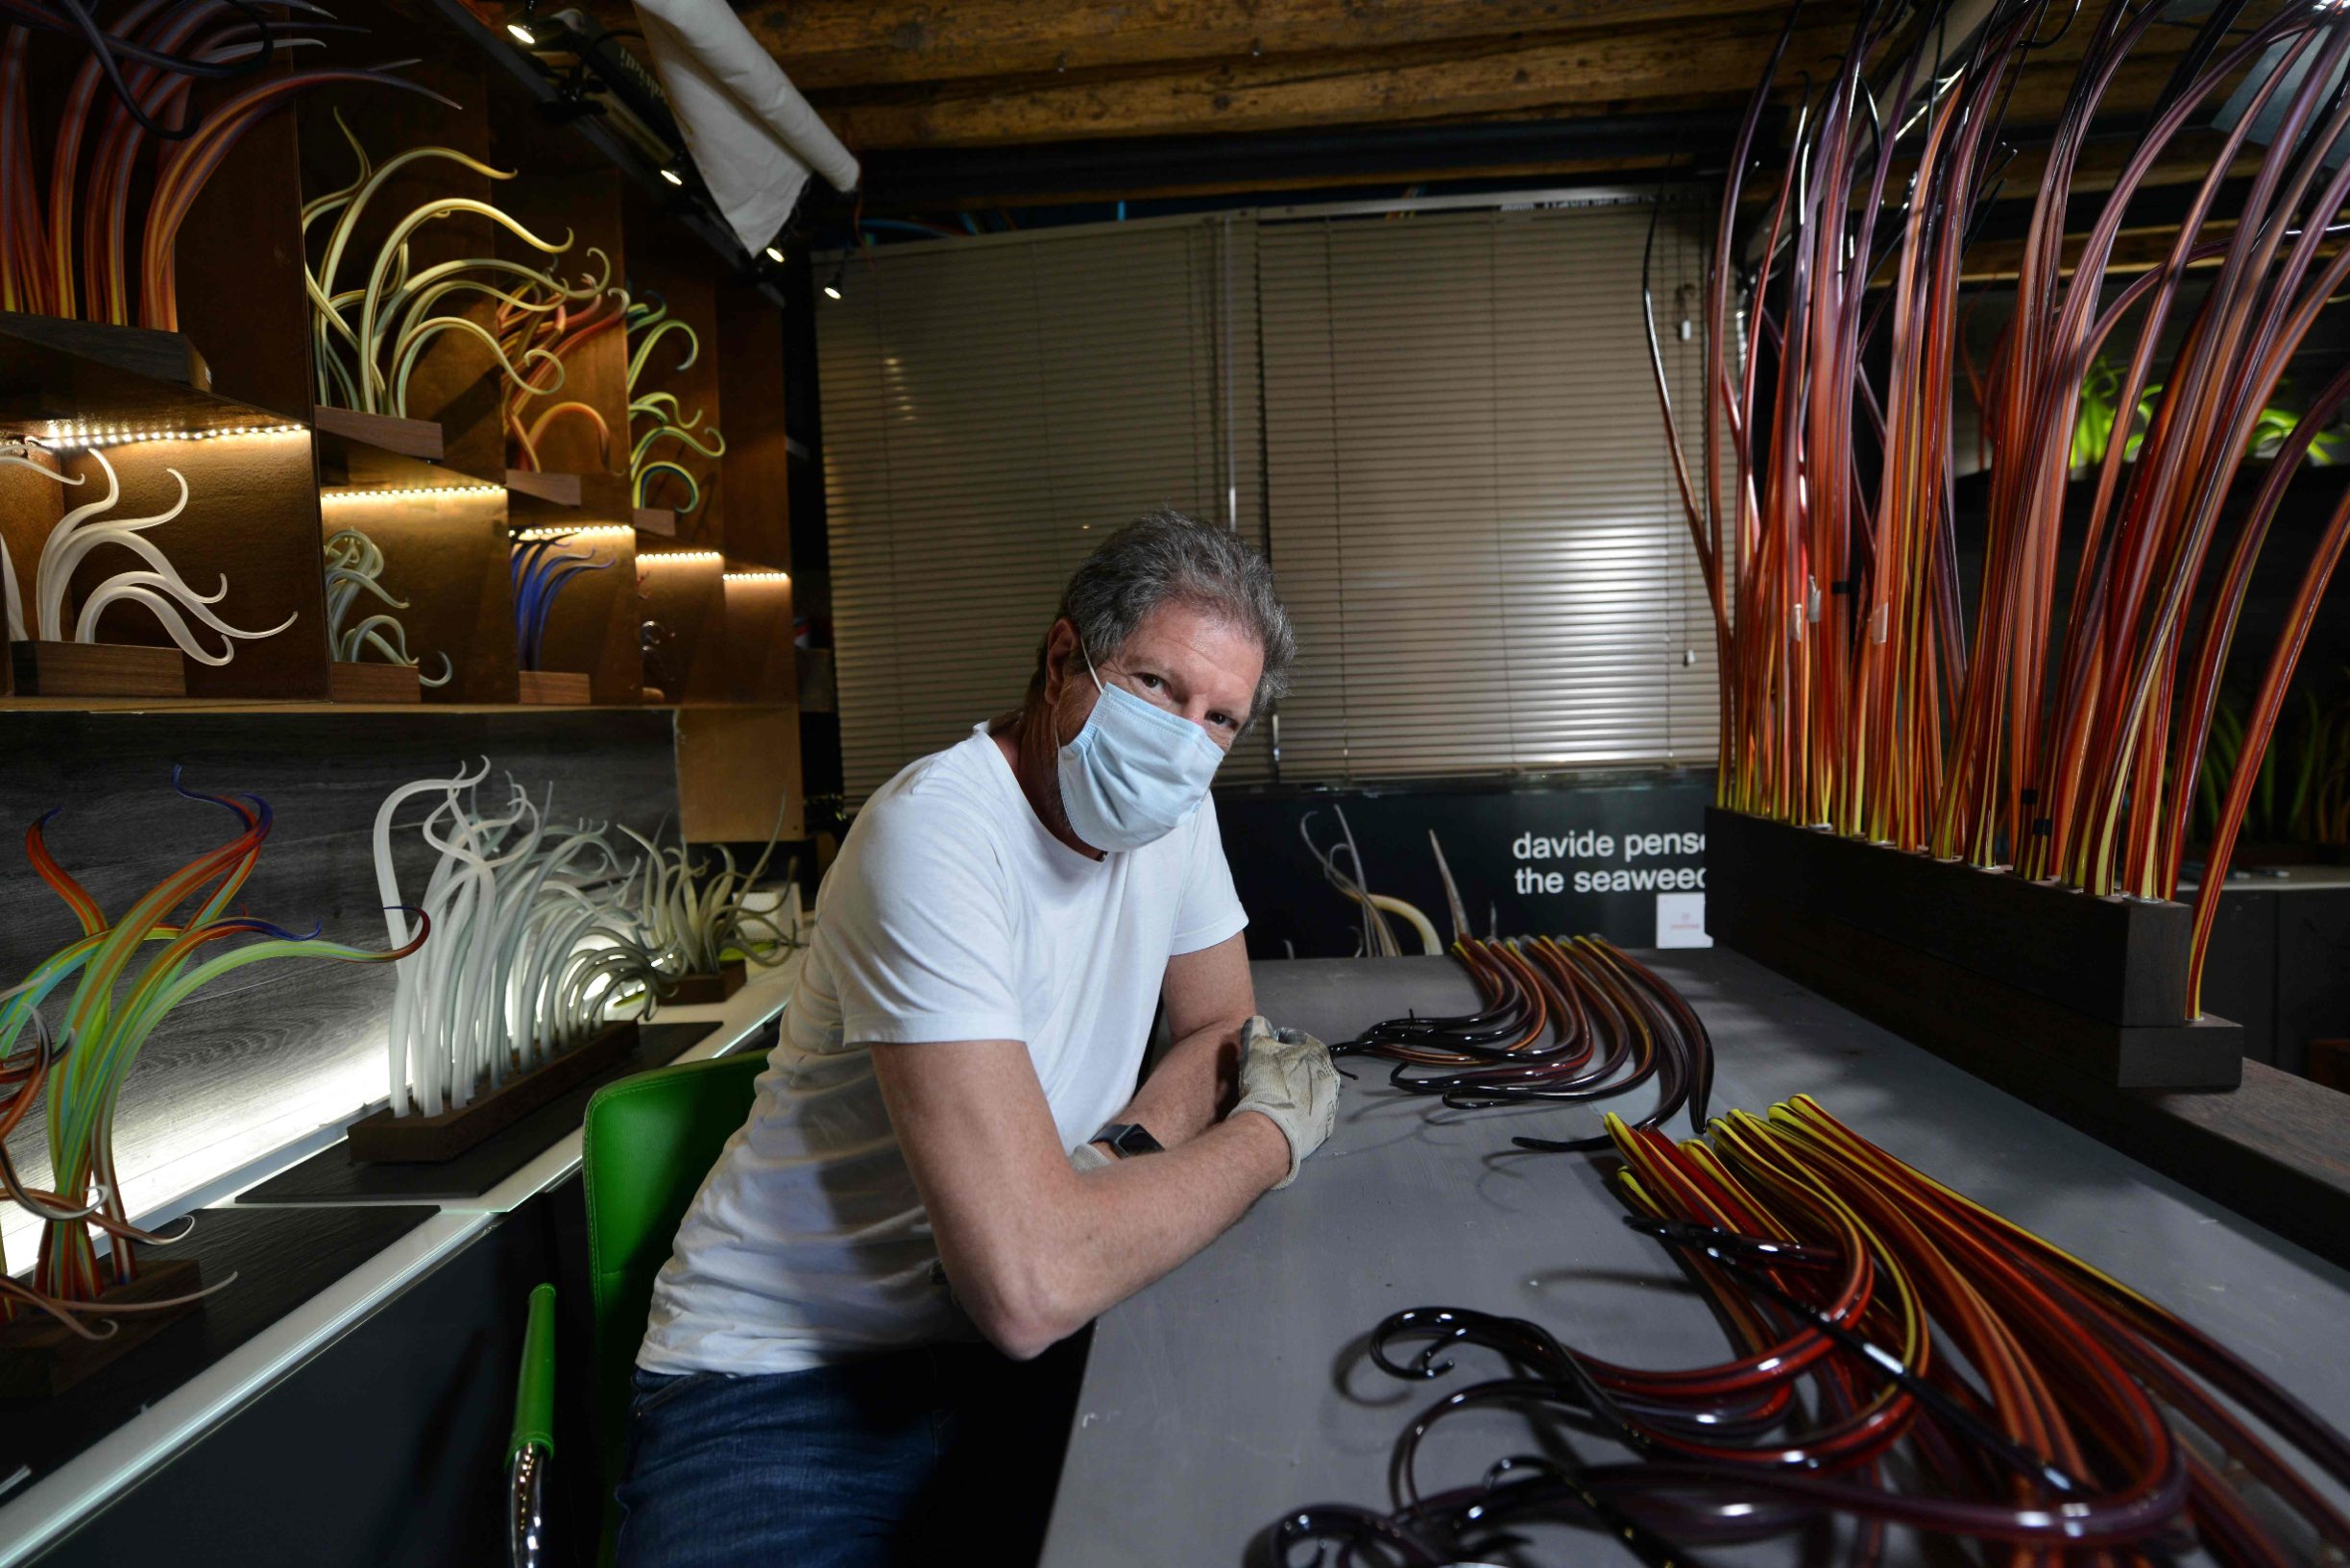 Italian glass artist Davide Penso poses in his studio on May 18, 2020 in Murano during the country's lockdown aimed at curbing the spread of the COVID-19 infection, caused by the novel coronavirus. - Restaurants and churches reopen in Italy on May 18, 2020 as part of a fresh wave of lockdown easing in Europe and the country's latest step in a cautious, gradual return to normality, allowing businesses and churches to reopen after a two-month lockdown. (Photo by ANDREA PATTARO / AFP)